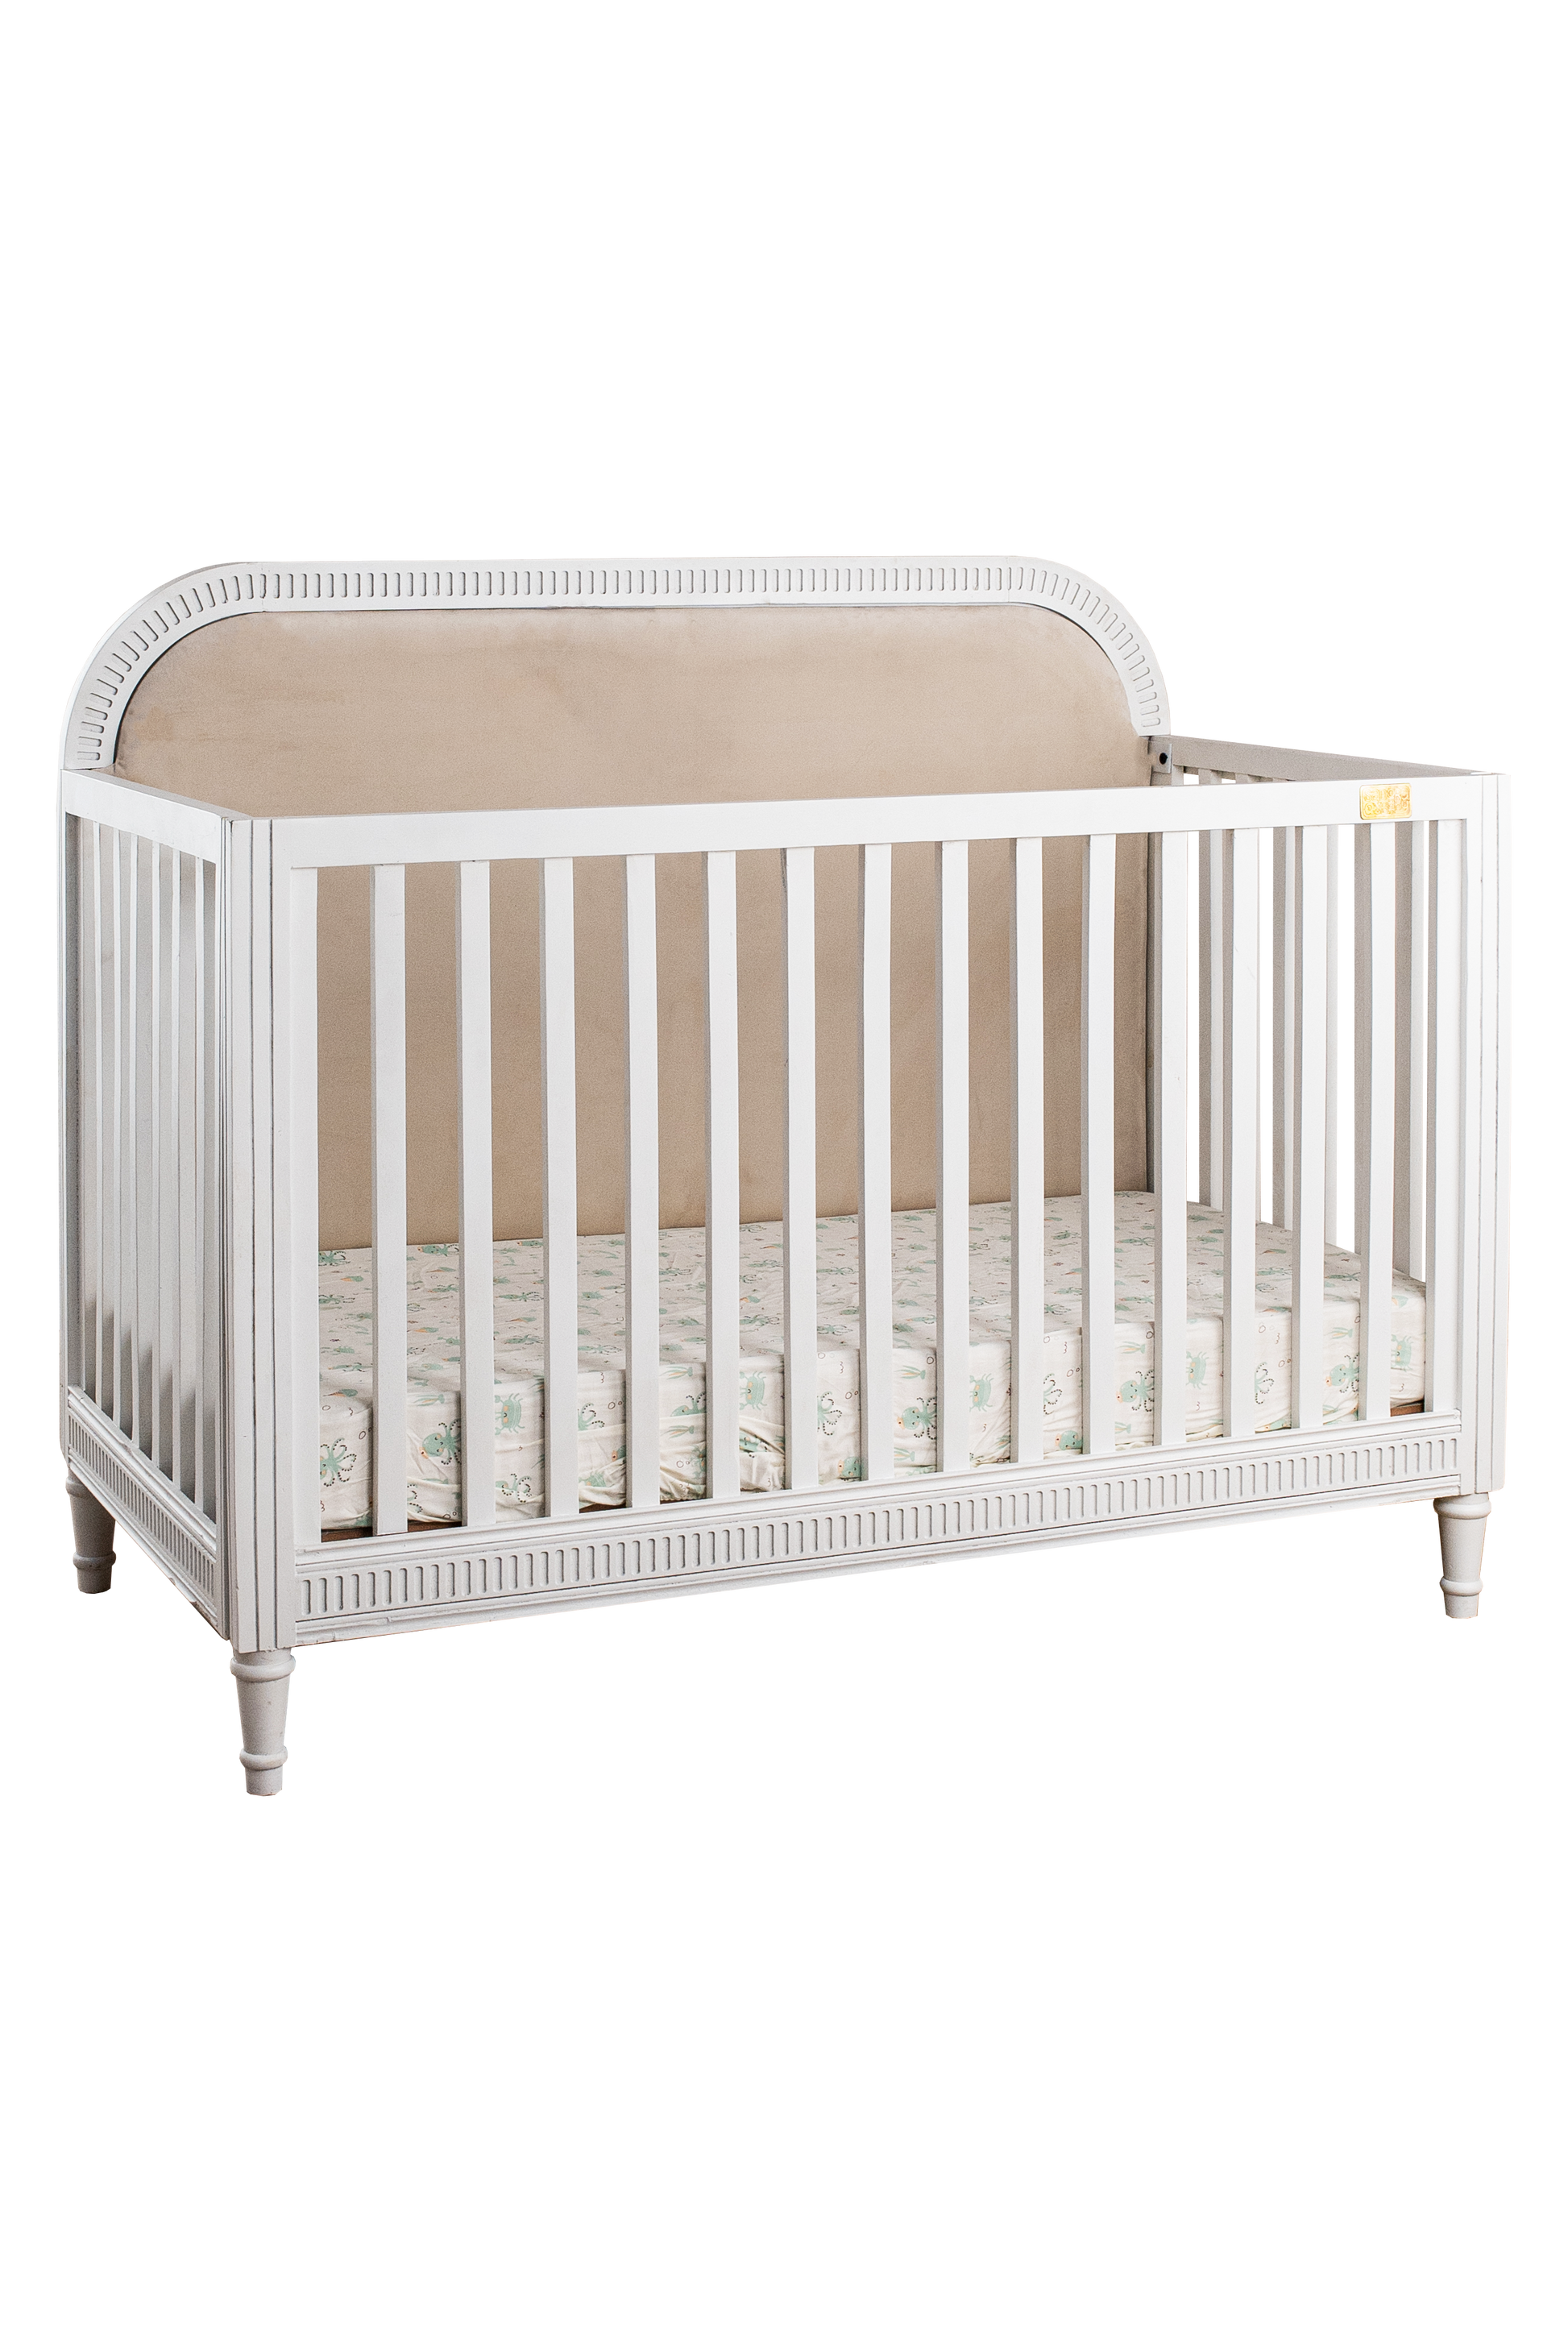 Buy Wooden Baby Cot With Headboard - White Duco Online - SkilloToys.com